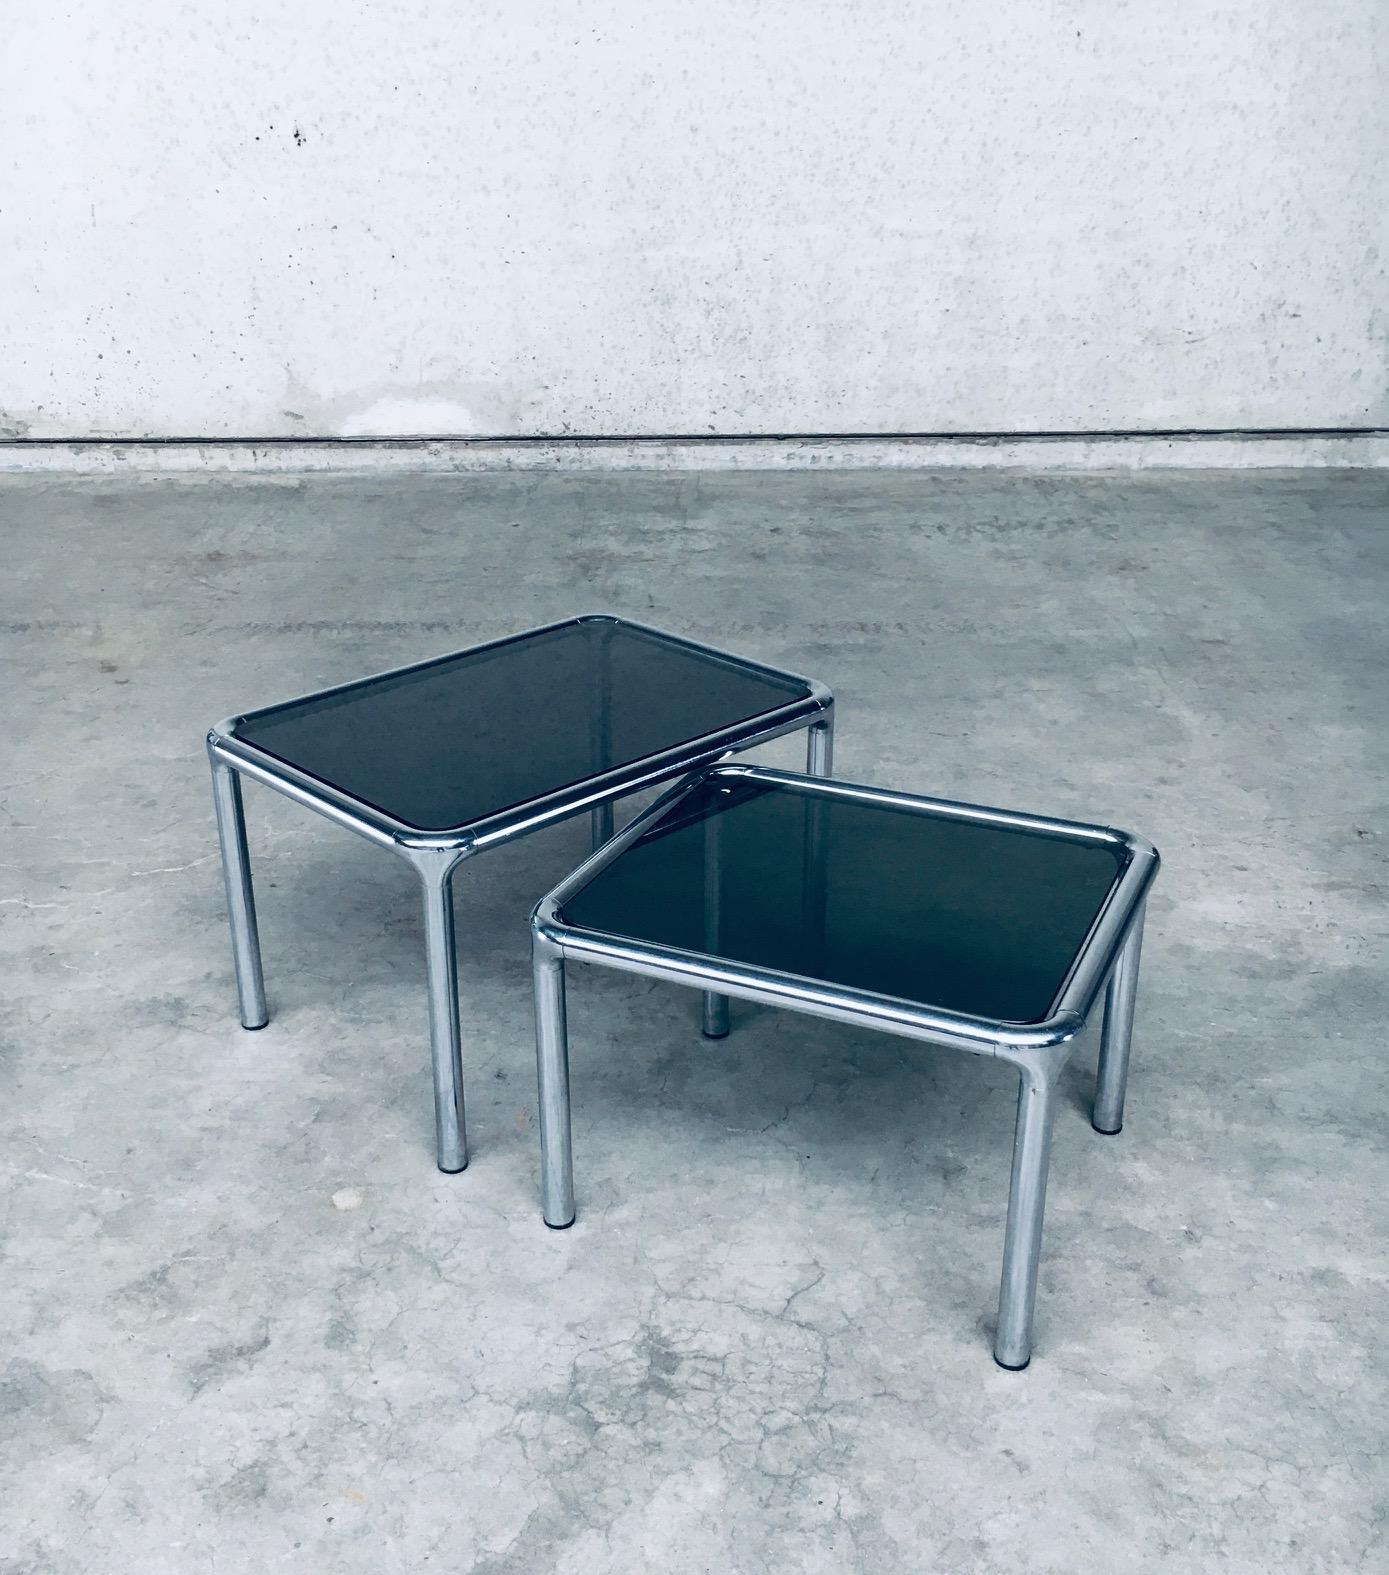 Chrome & Smoked Glass Nesting Tables by Etienne Fermigier, France 1970's For Sale 1